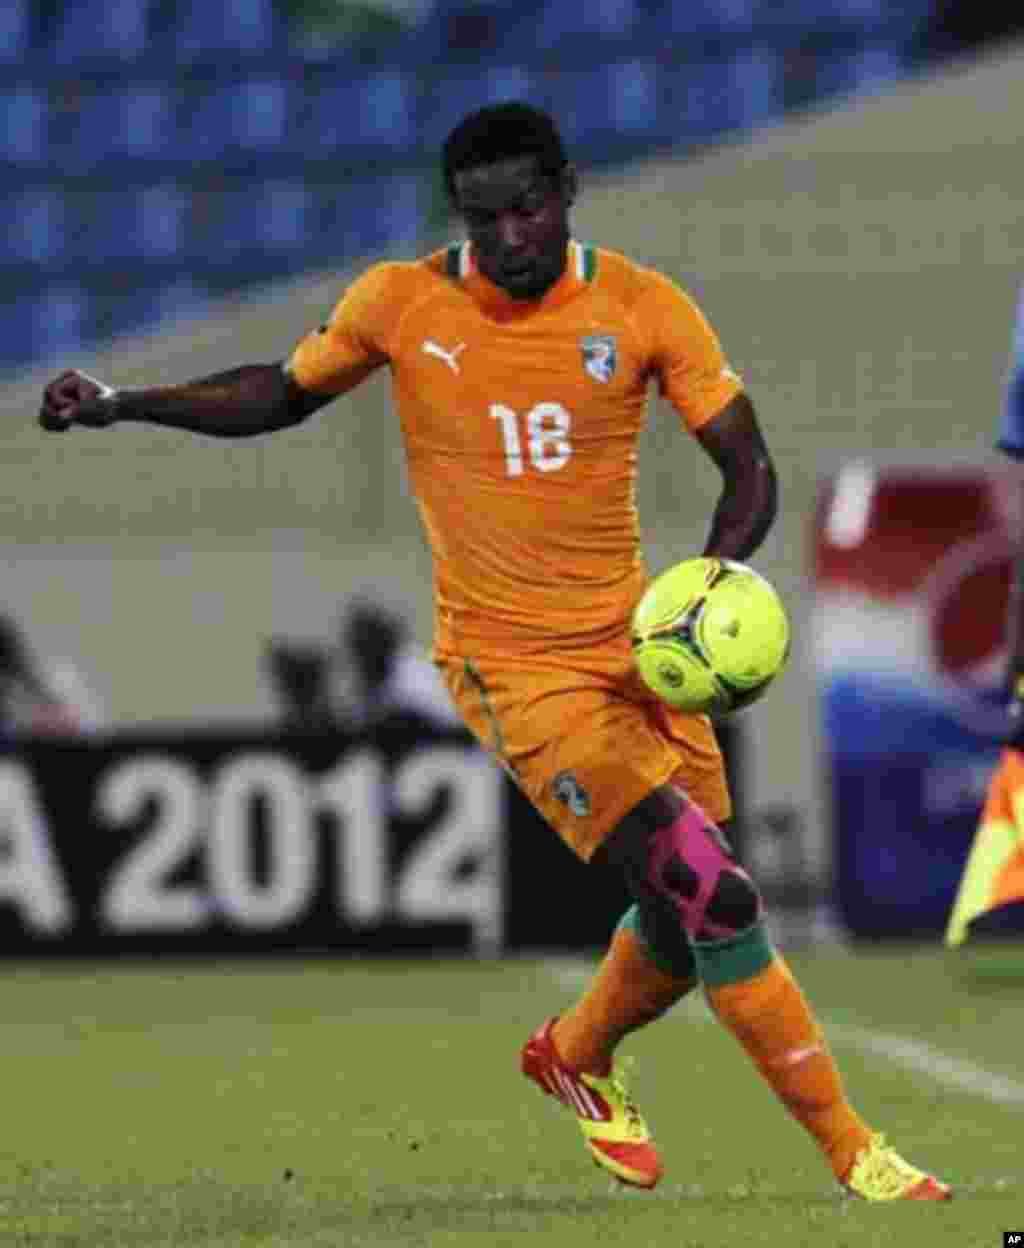 Abdul Kader Keita of Ivory Coast controls the ball during their African Nations Cup soccer match against Angola, in Malabo January 30, 2012.